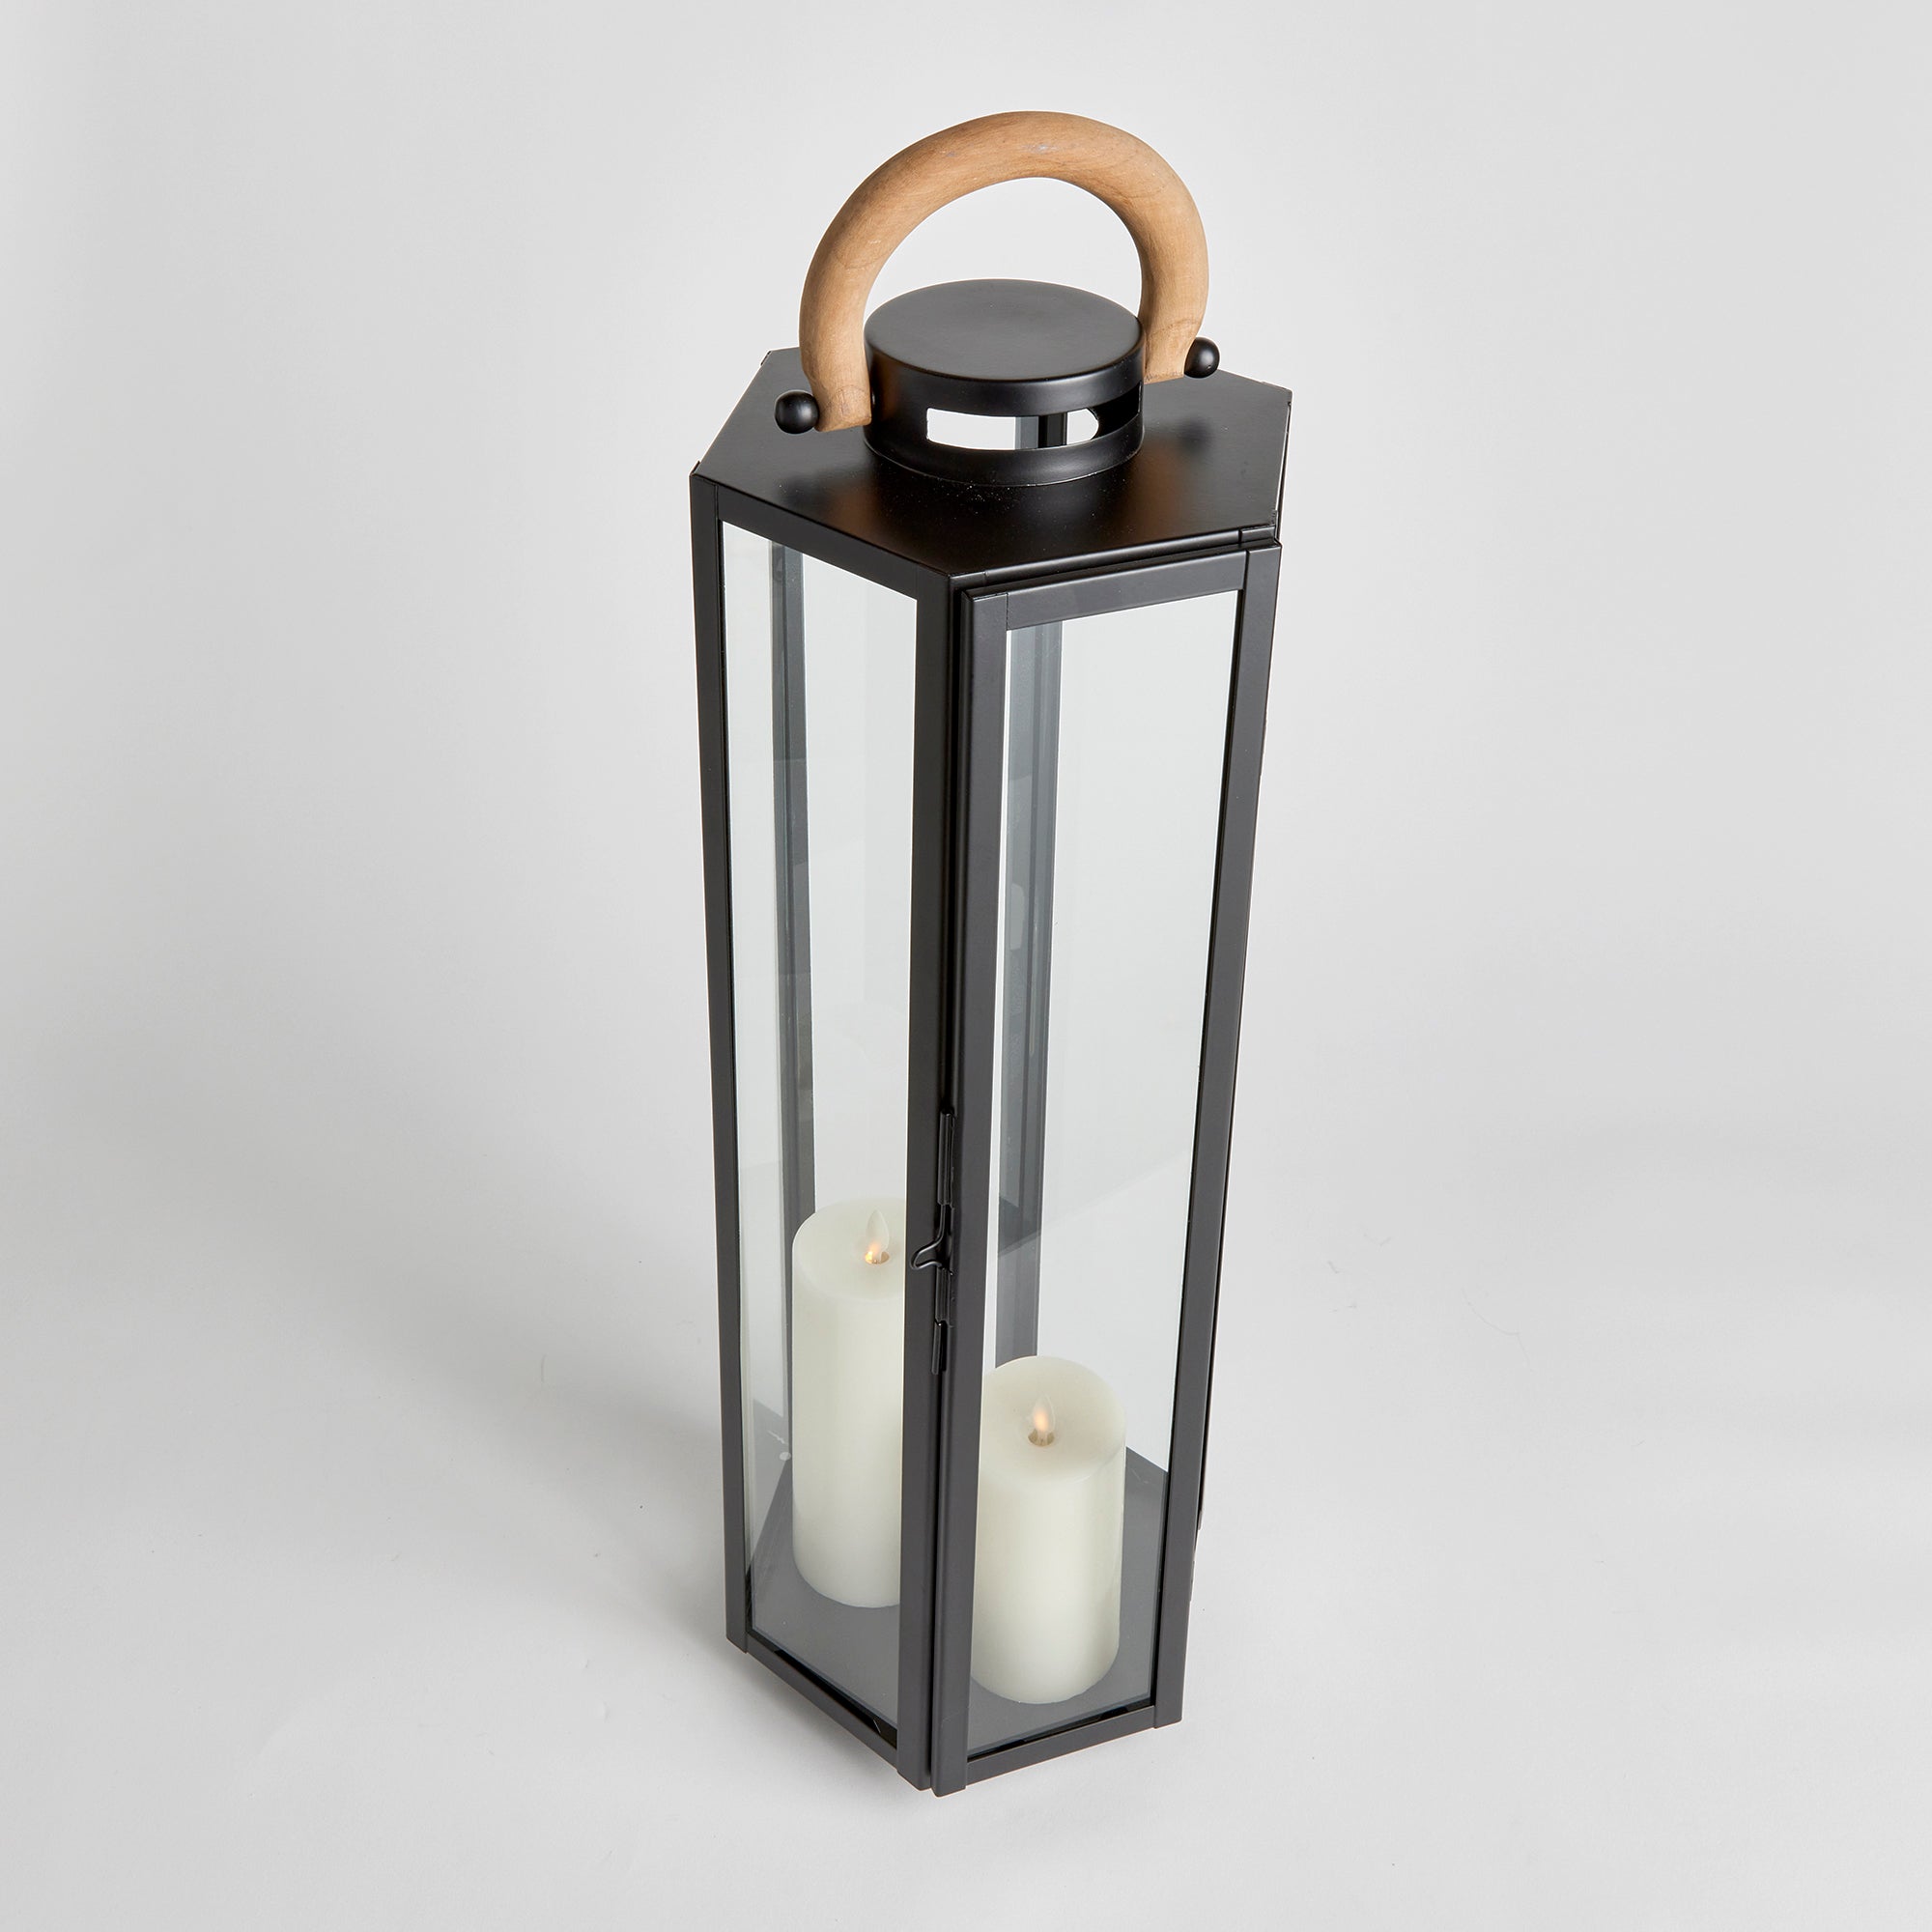 This matte black six panel lantern is made of iron and features a natural teak handle. Impressive in scale, it is a handsome outdoor accent by the pool, or at the front entry. Amethyst Home provides interior design, new construction, custom furniture, and area rugs in the Omaha metro area.